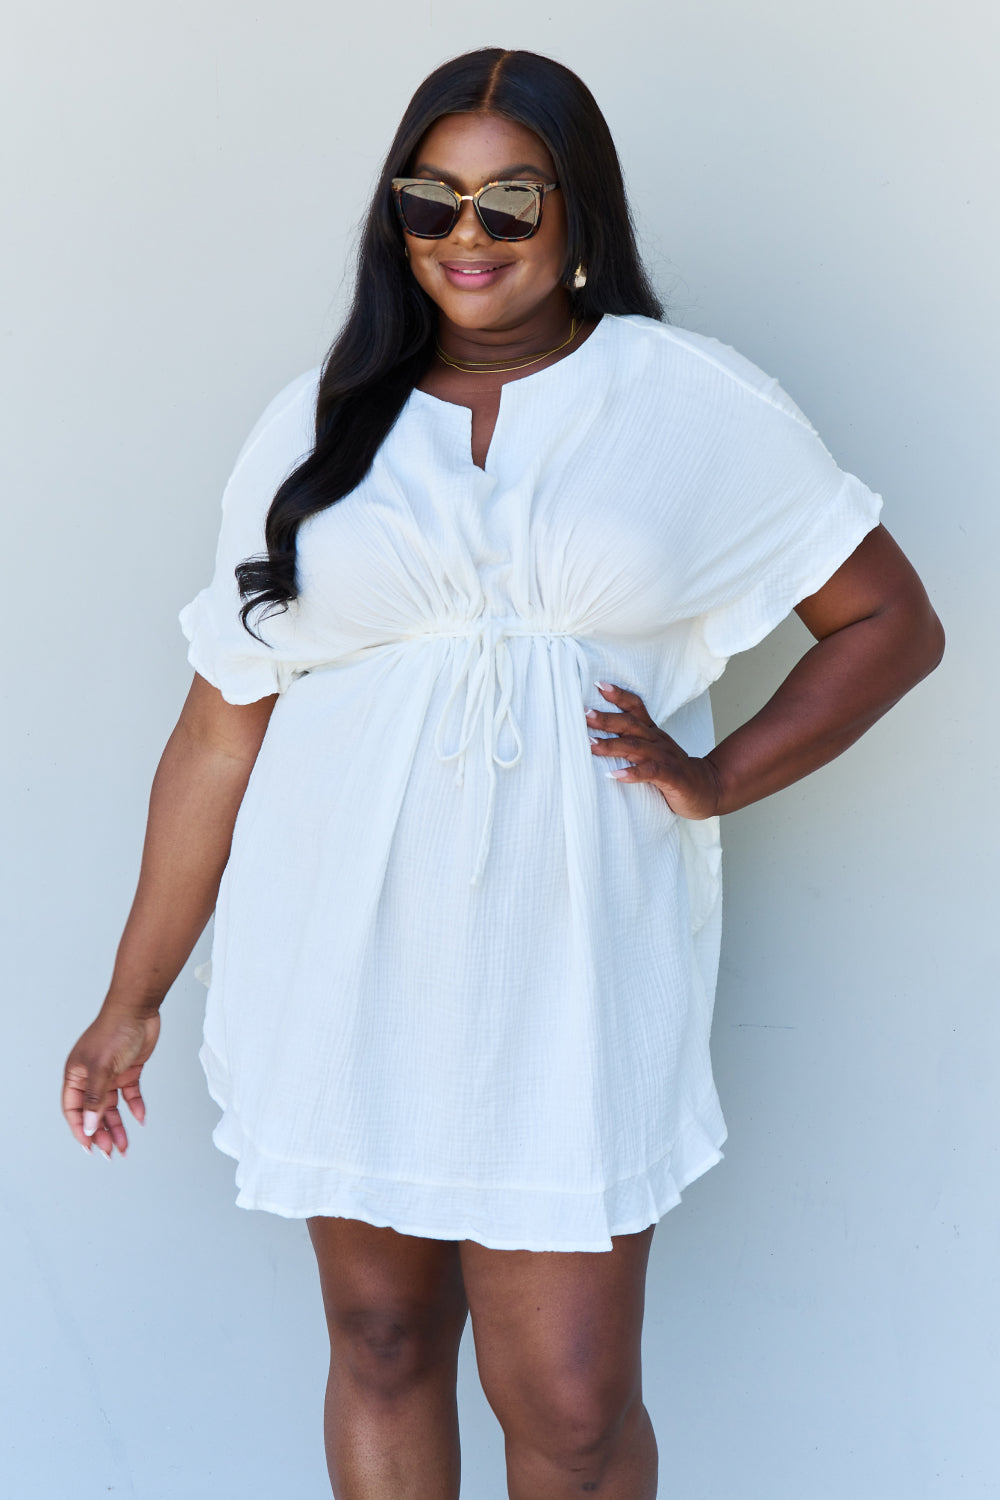 Ninexis Out Of Time Full Size Ruffle Hem Dress with Drawstring Waistband in White - DRESSES - White